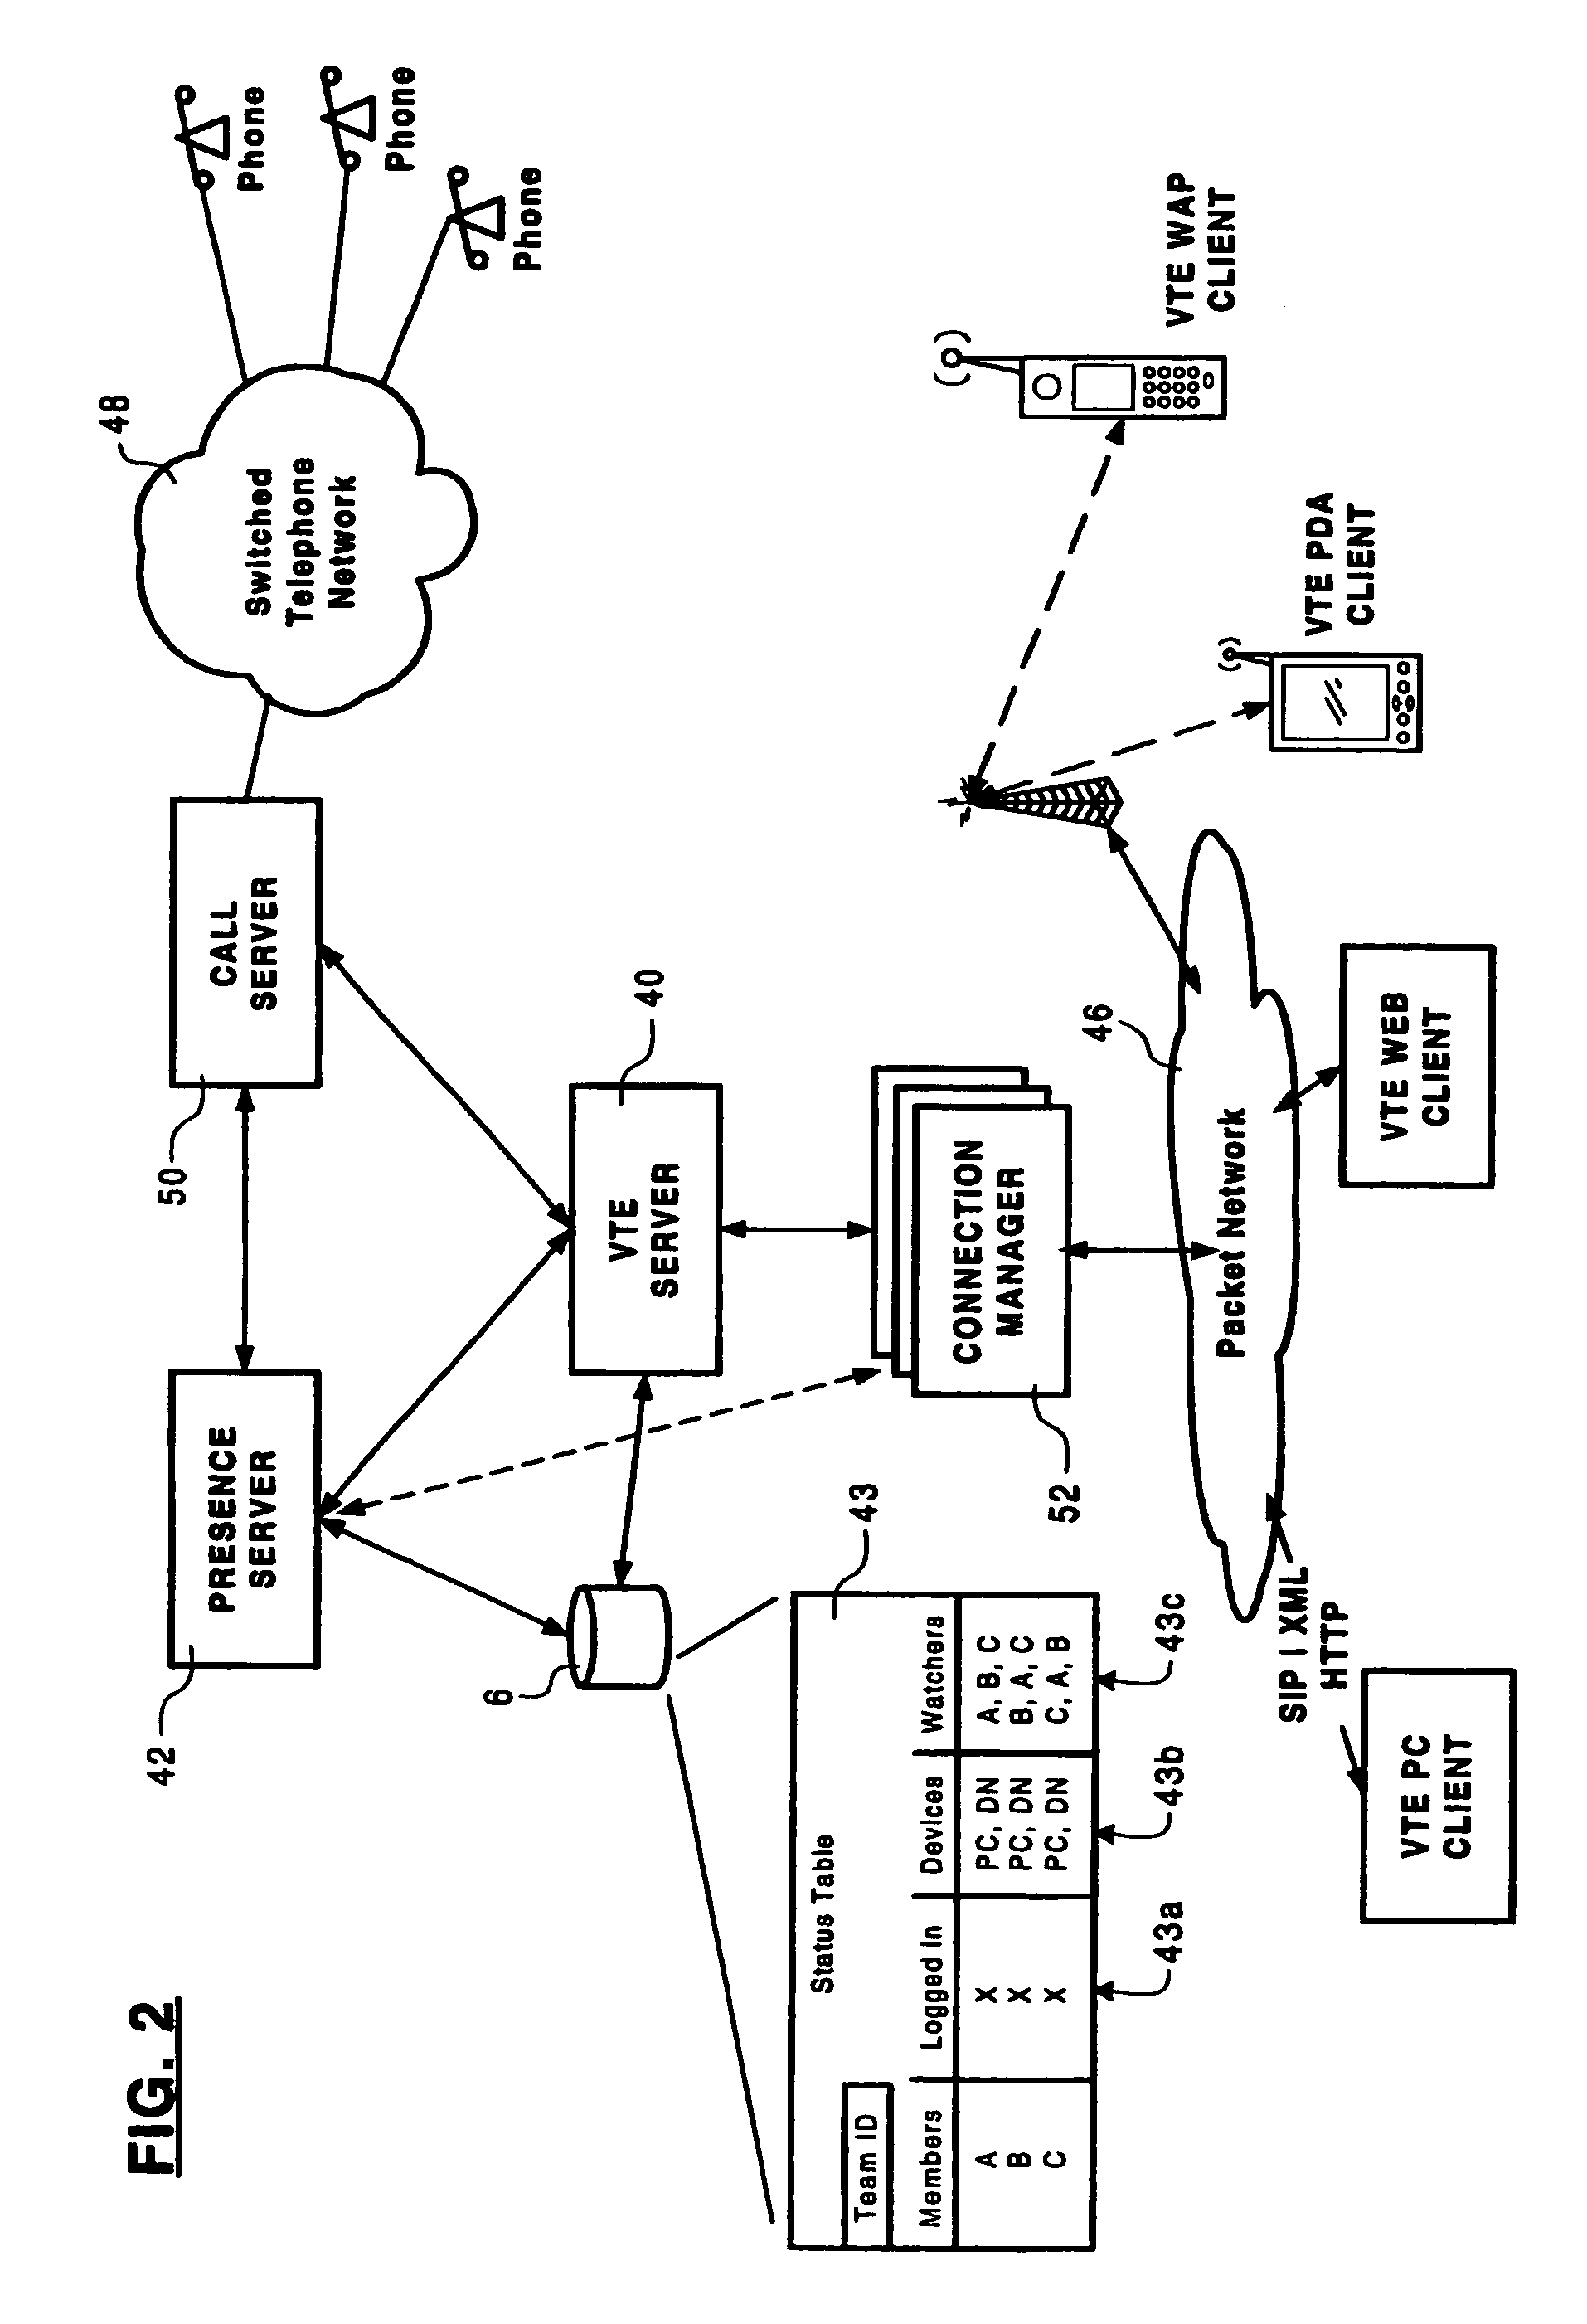 Method and system for creating a virtual team environment